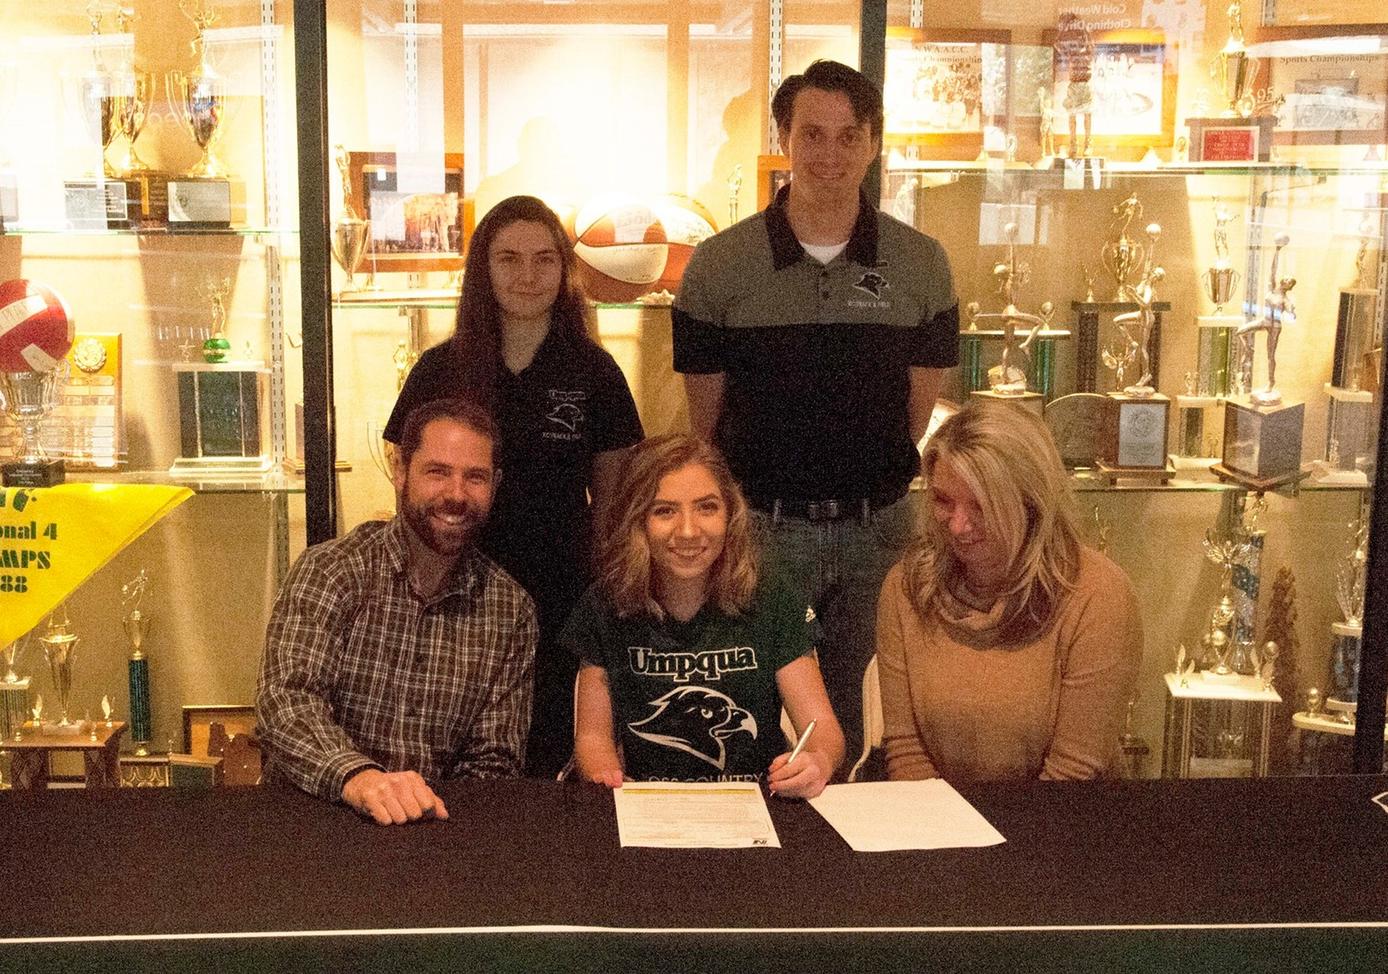 Waters to Join RiverHawk Cross Country and Track & Field